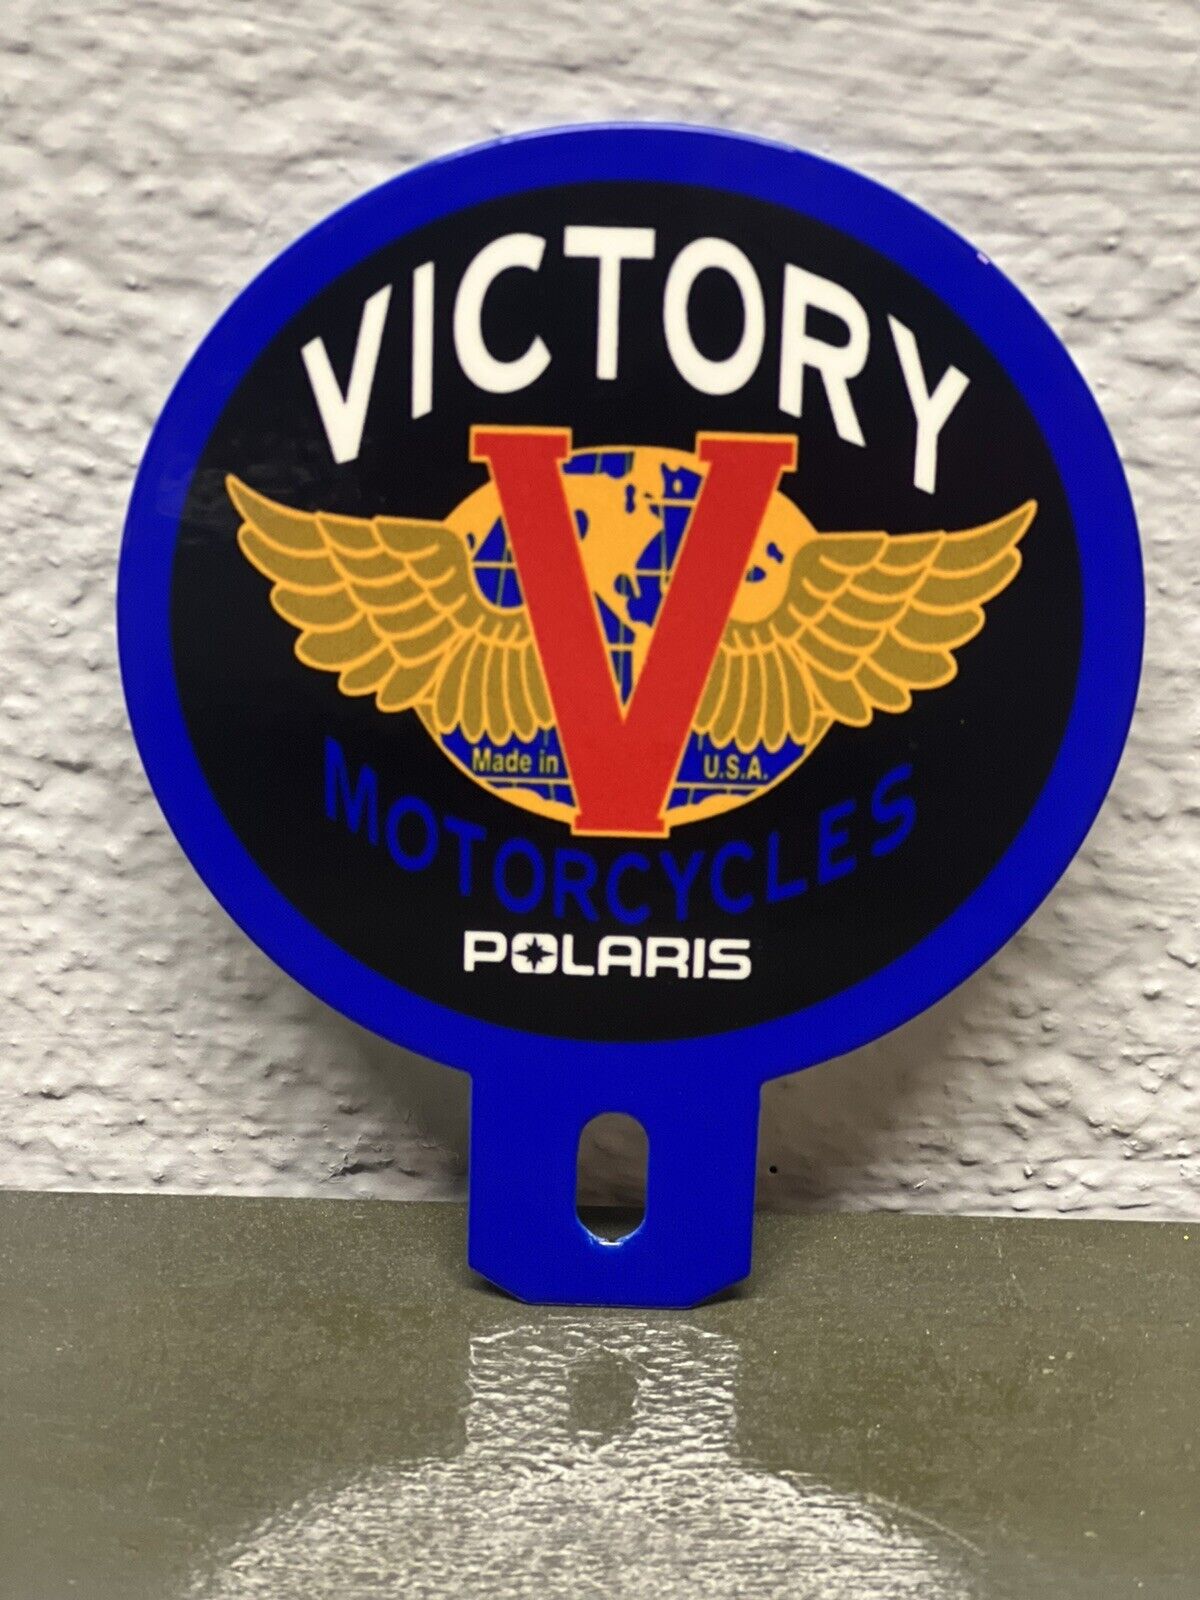 Victory Motorcycles Polaris Metal Plate Topper Sign Gas Oil Sales Service Ride